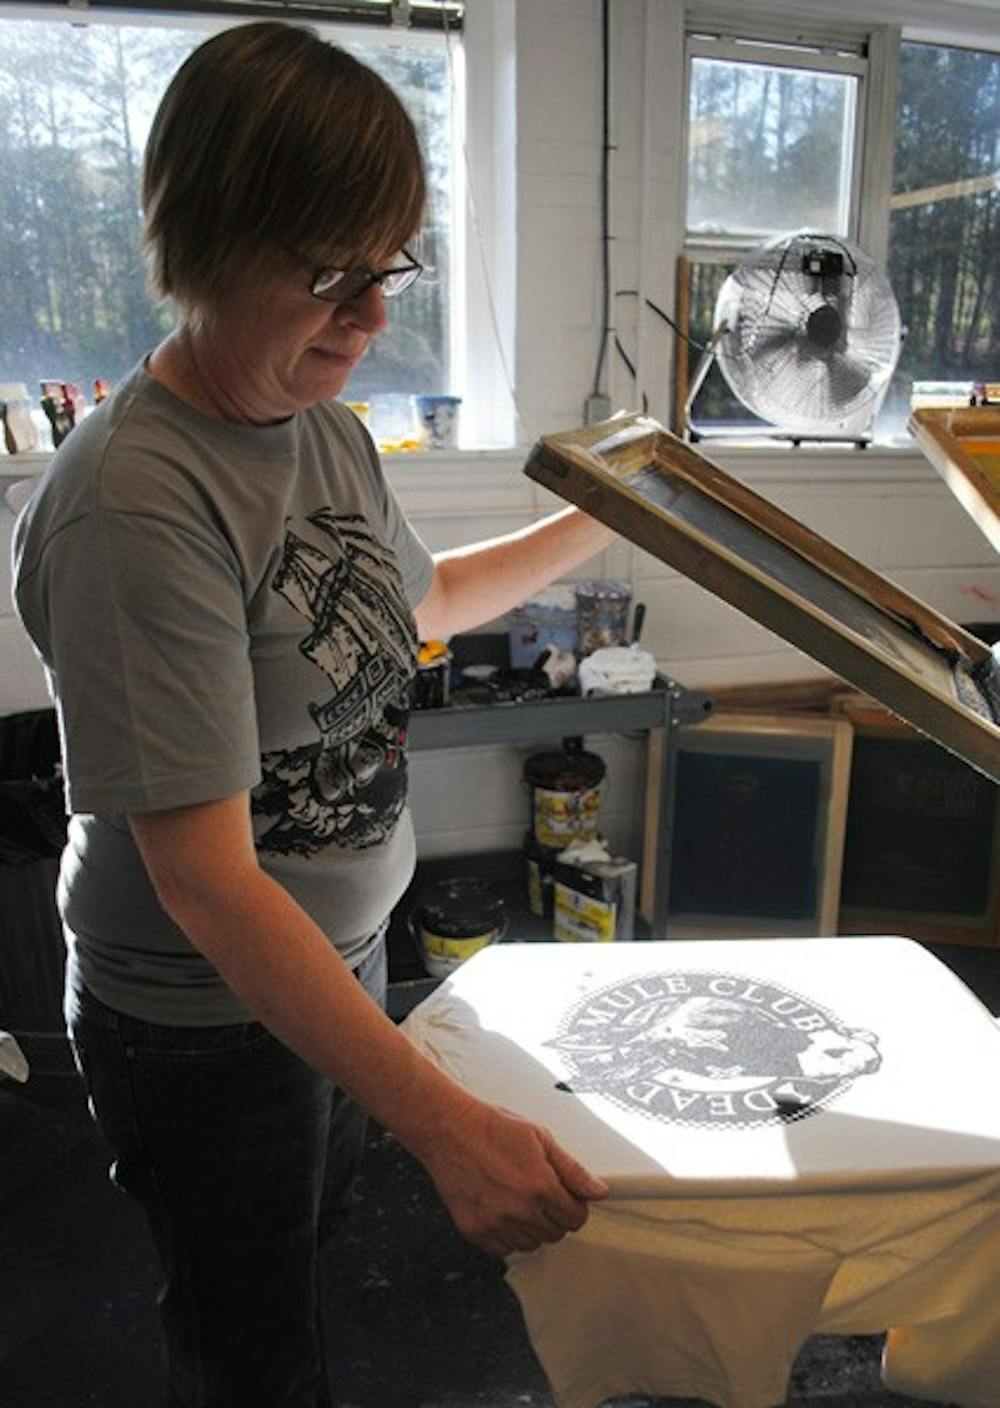 Melanie Wall, of Bread and Butter Screen Printing, prints a “Dead Mule Club” T-shirt at her shop in Chapel Hill on Wednesday.